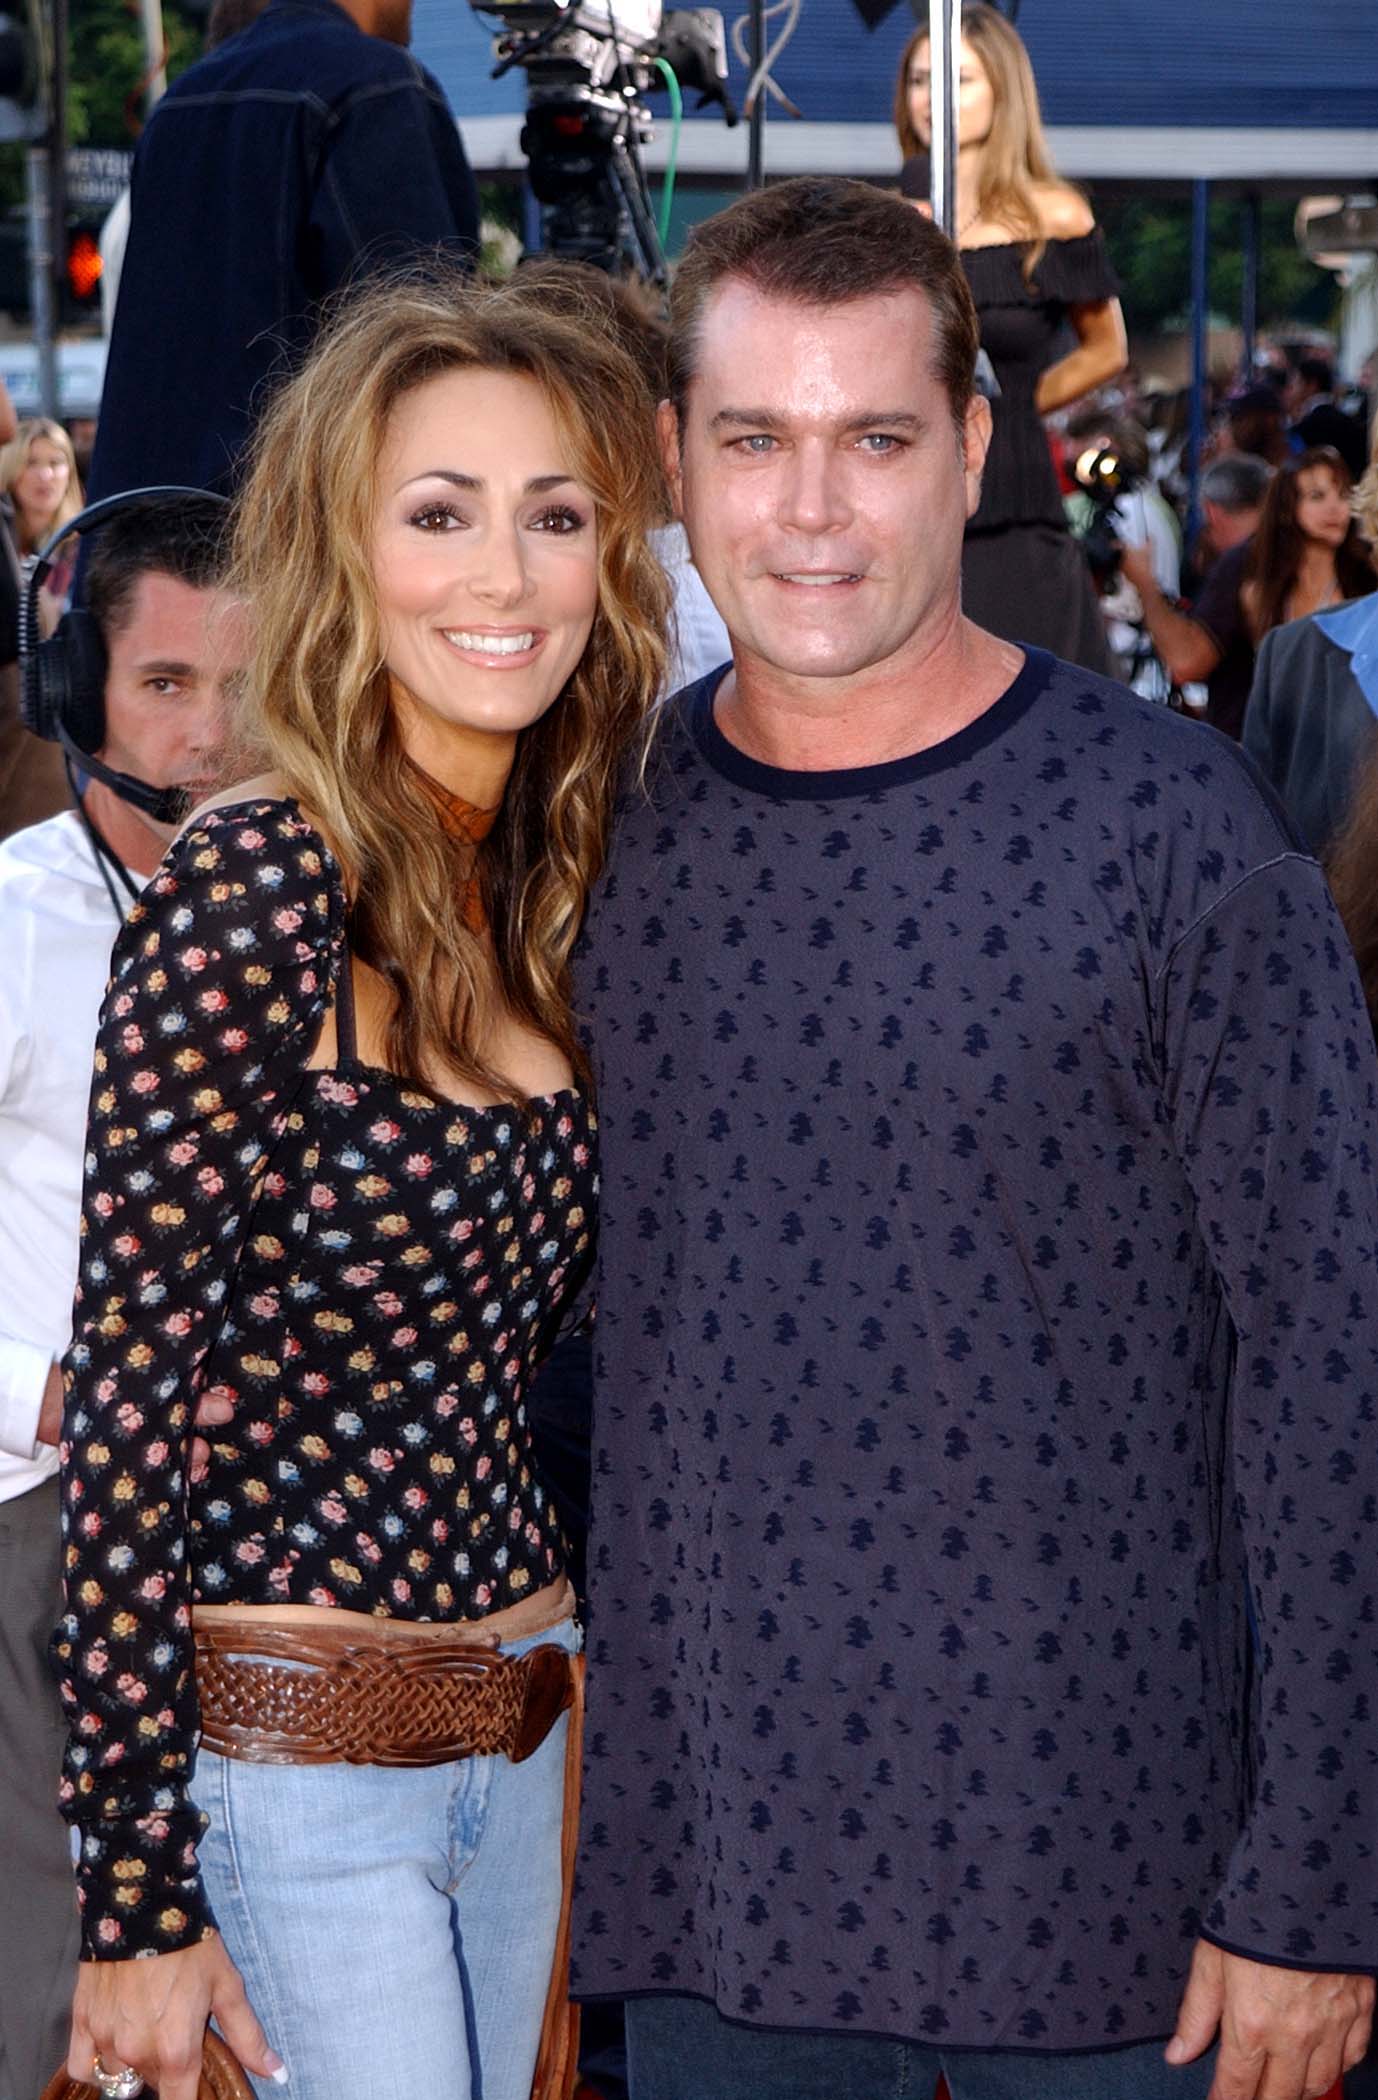 Michelle Grace and Ray Liotta during "XXX" Los Angeles premiere in Westwood, California, on August 5, 2002. | Source: Jeff Kravitz/FilmMagic, Inc/Getty Images